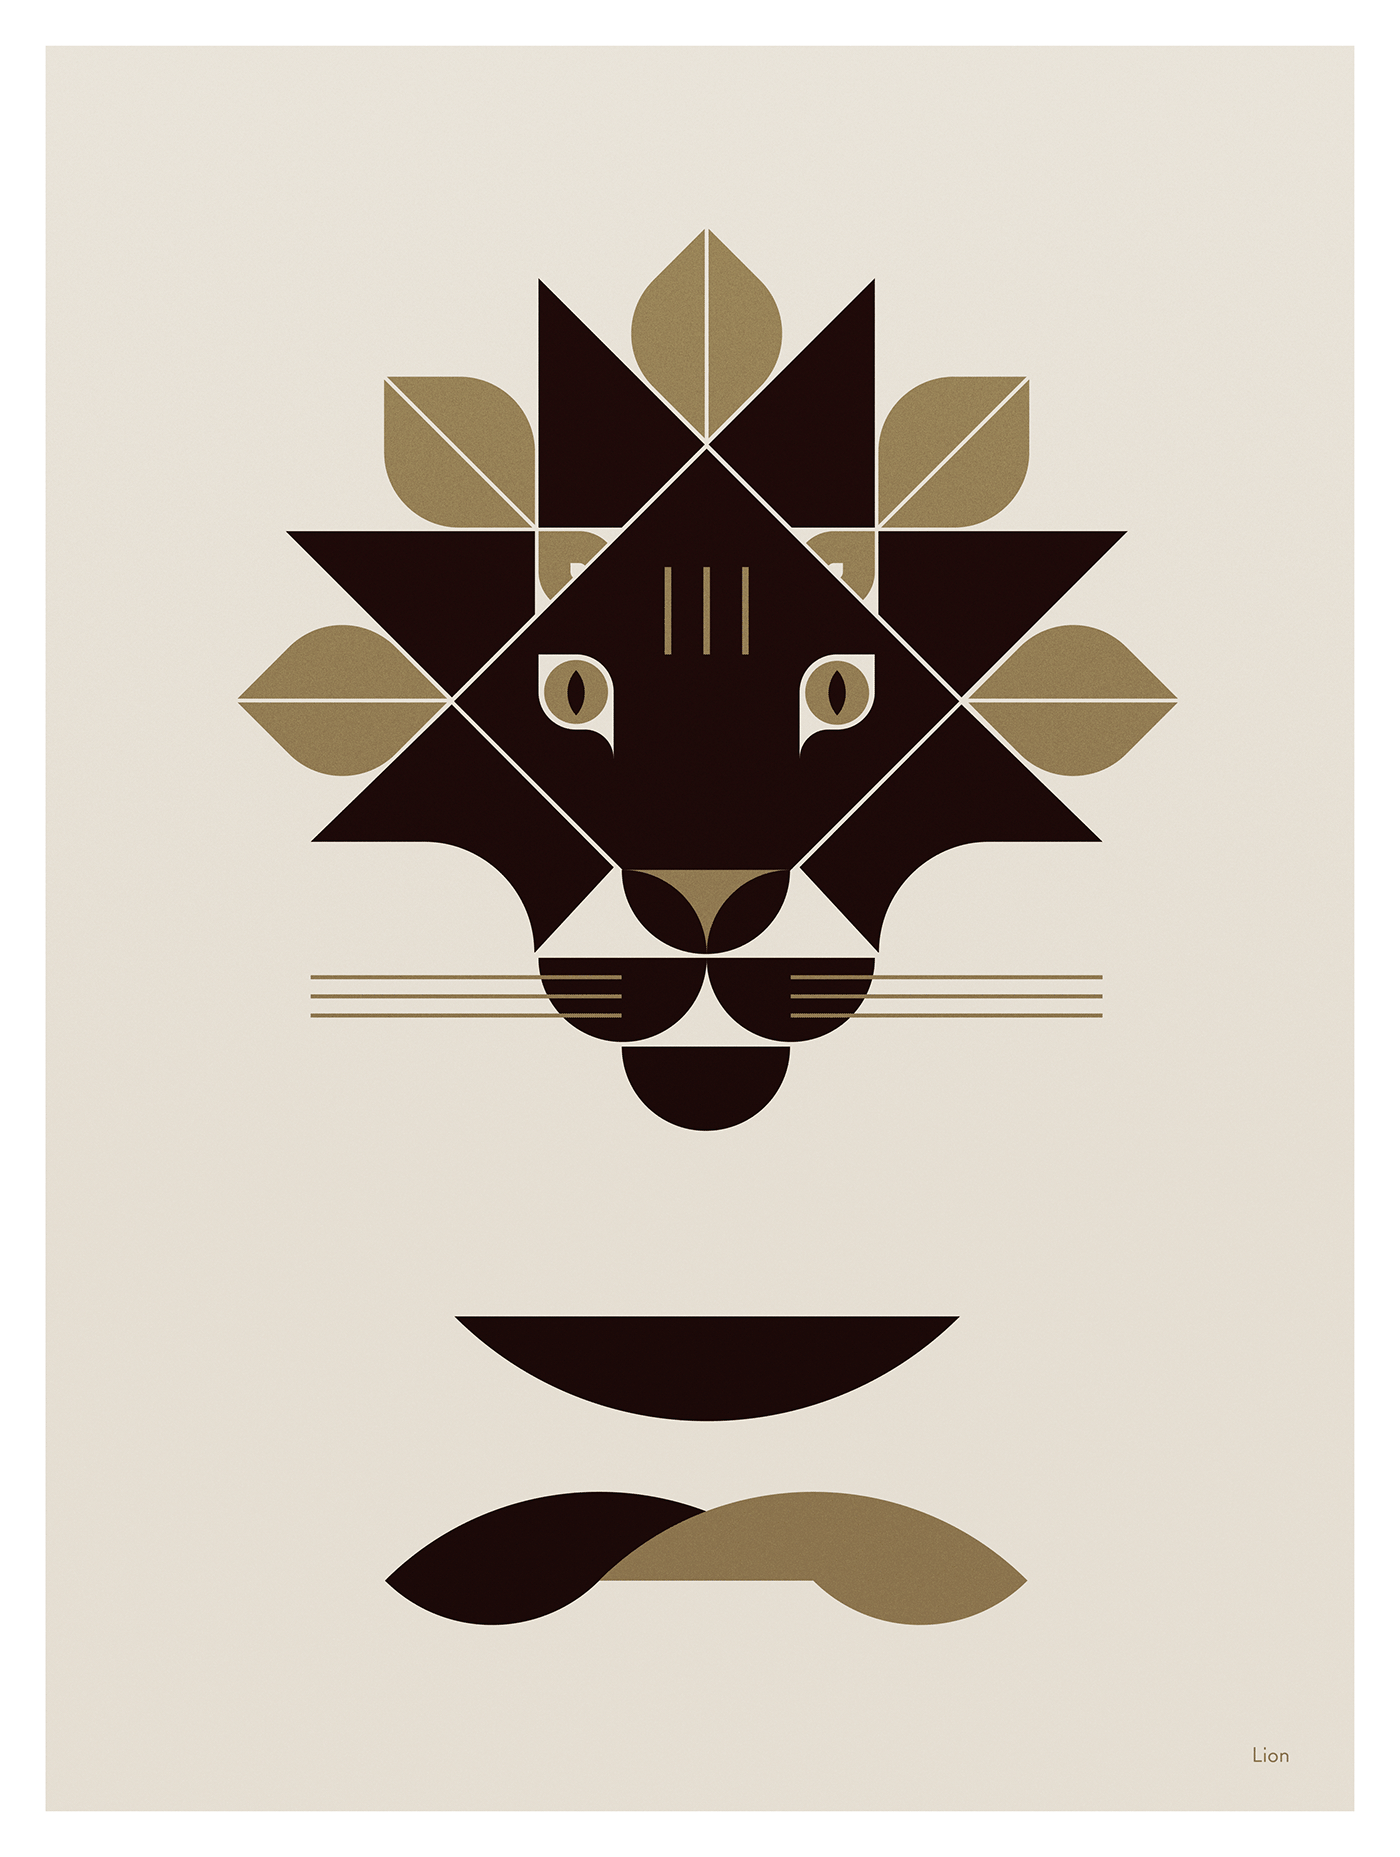 Geometric animals, poster series from Studio Soleil, that created for a various of projects. Lion!